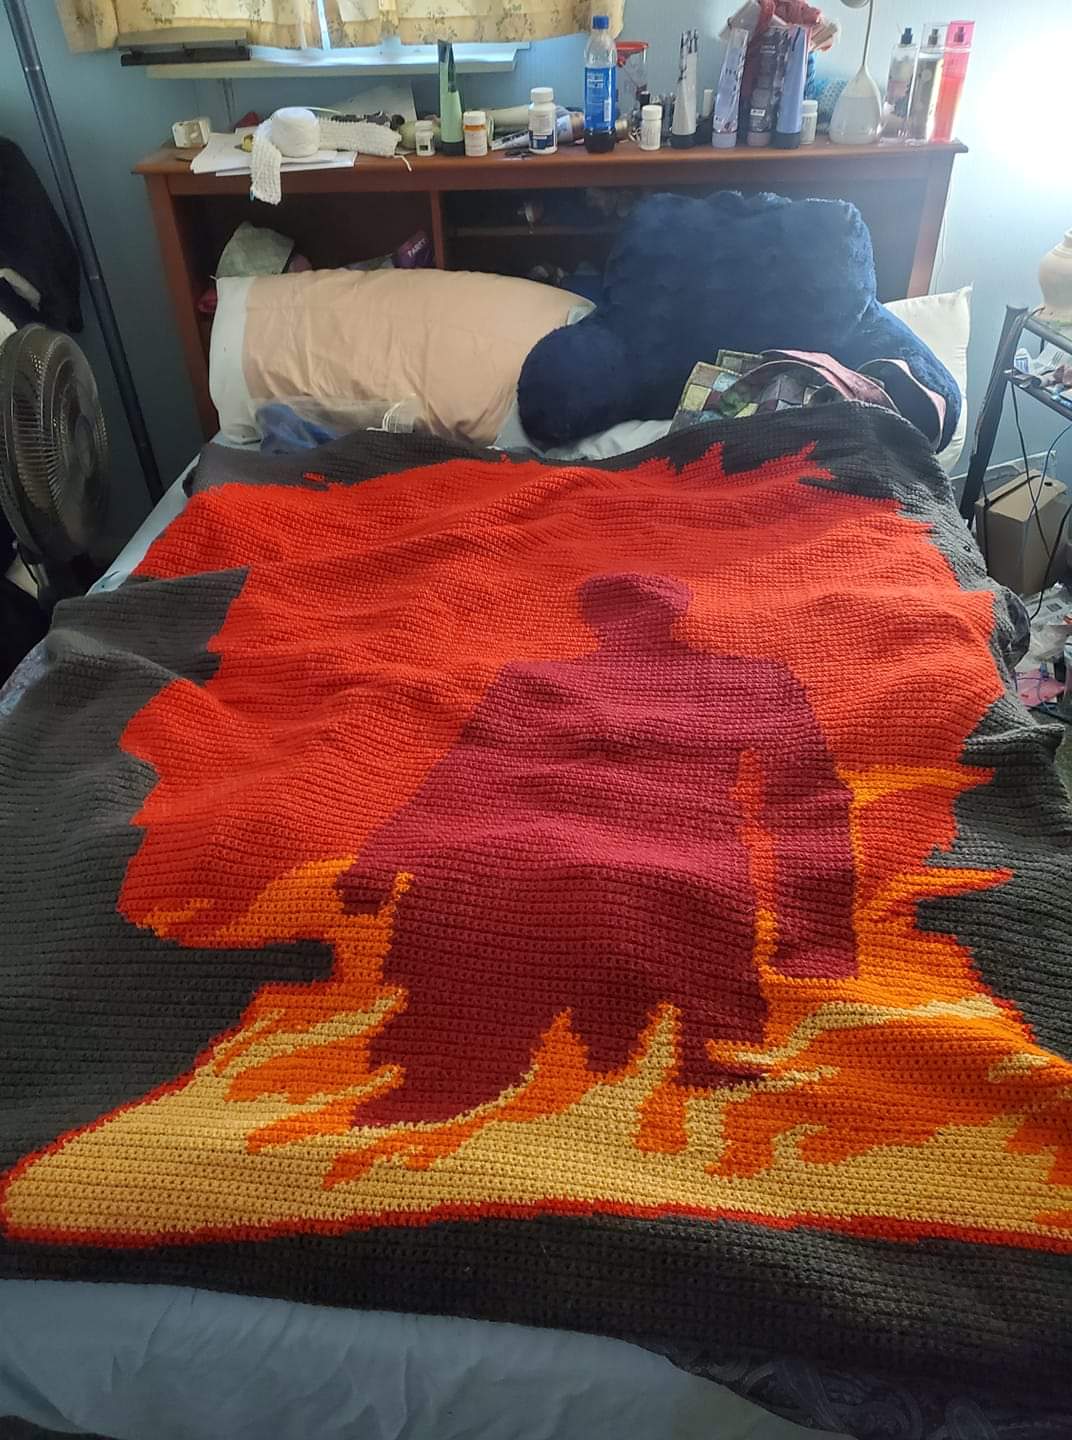 The Time Lord Victorious Crochet Graphghan Pattern